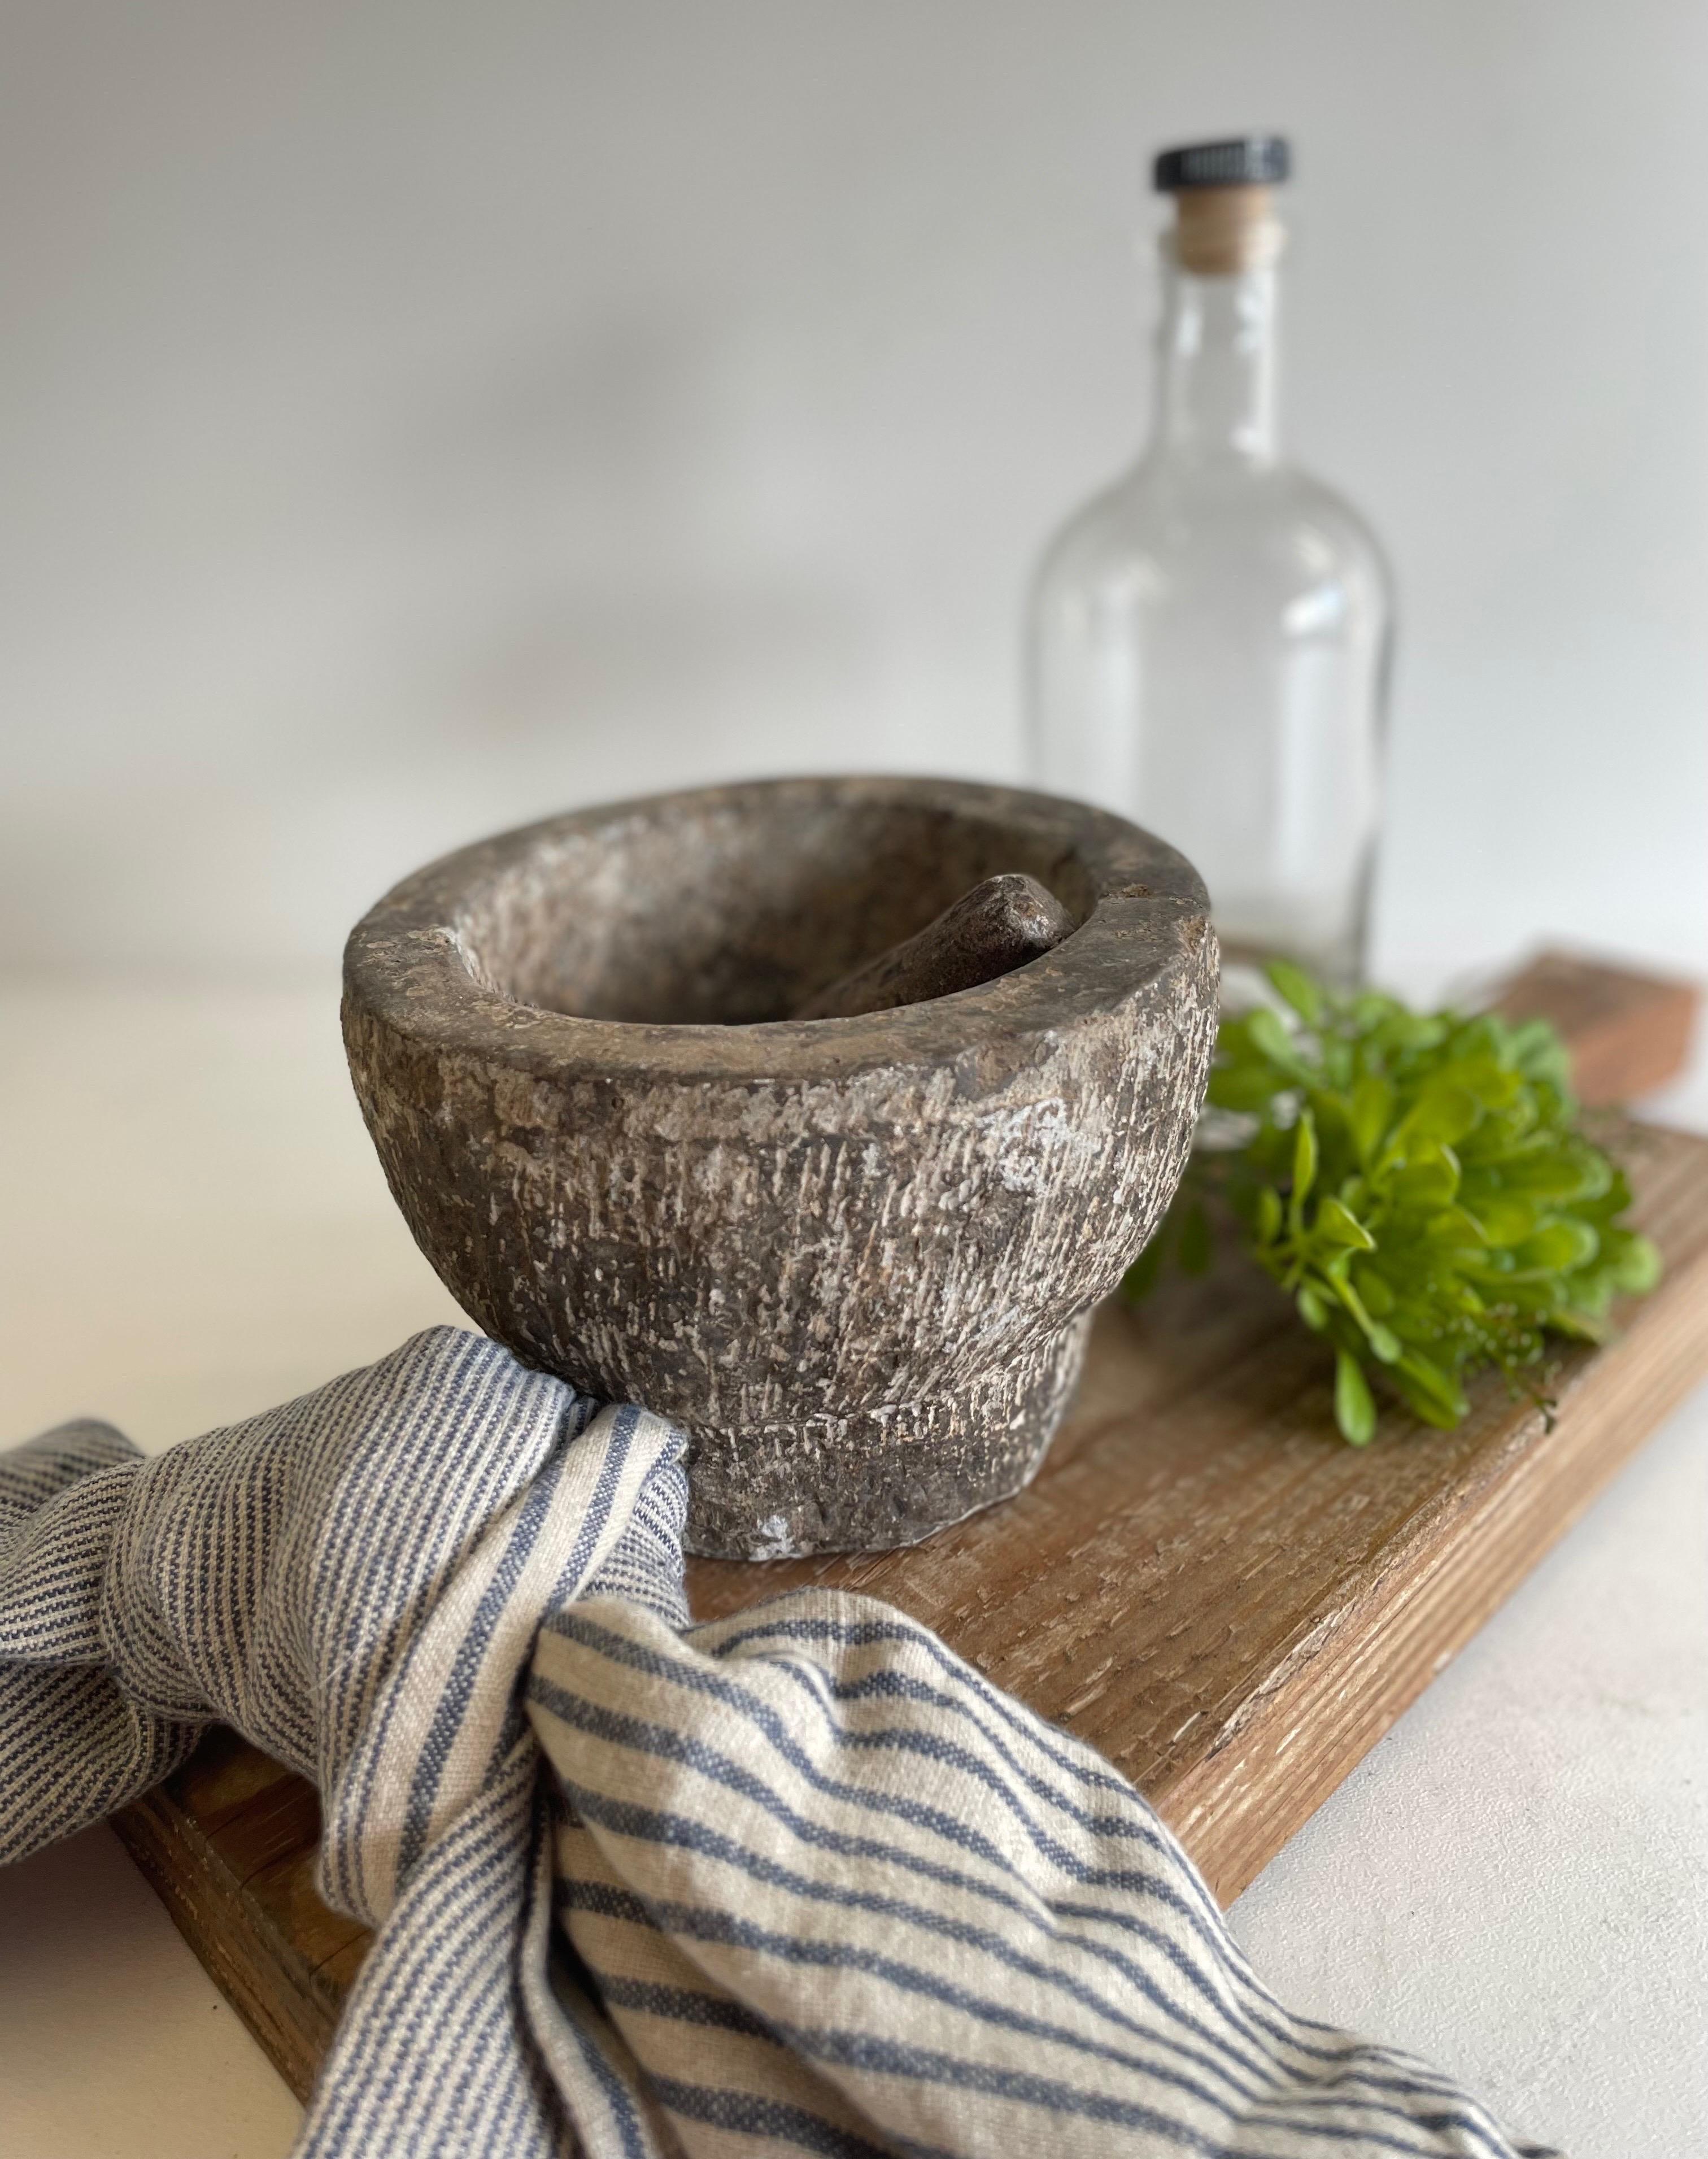 Antique stone mortar and pestle bowl set, great decorative item, or can be used. Accessories not included 
Size: 6 1/2” D x 4 1/2” H.